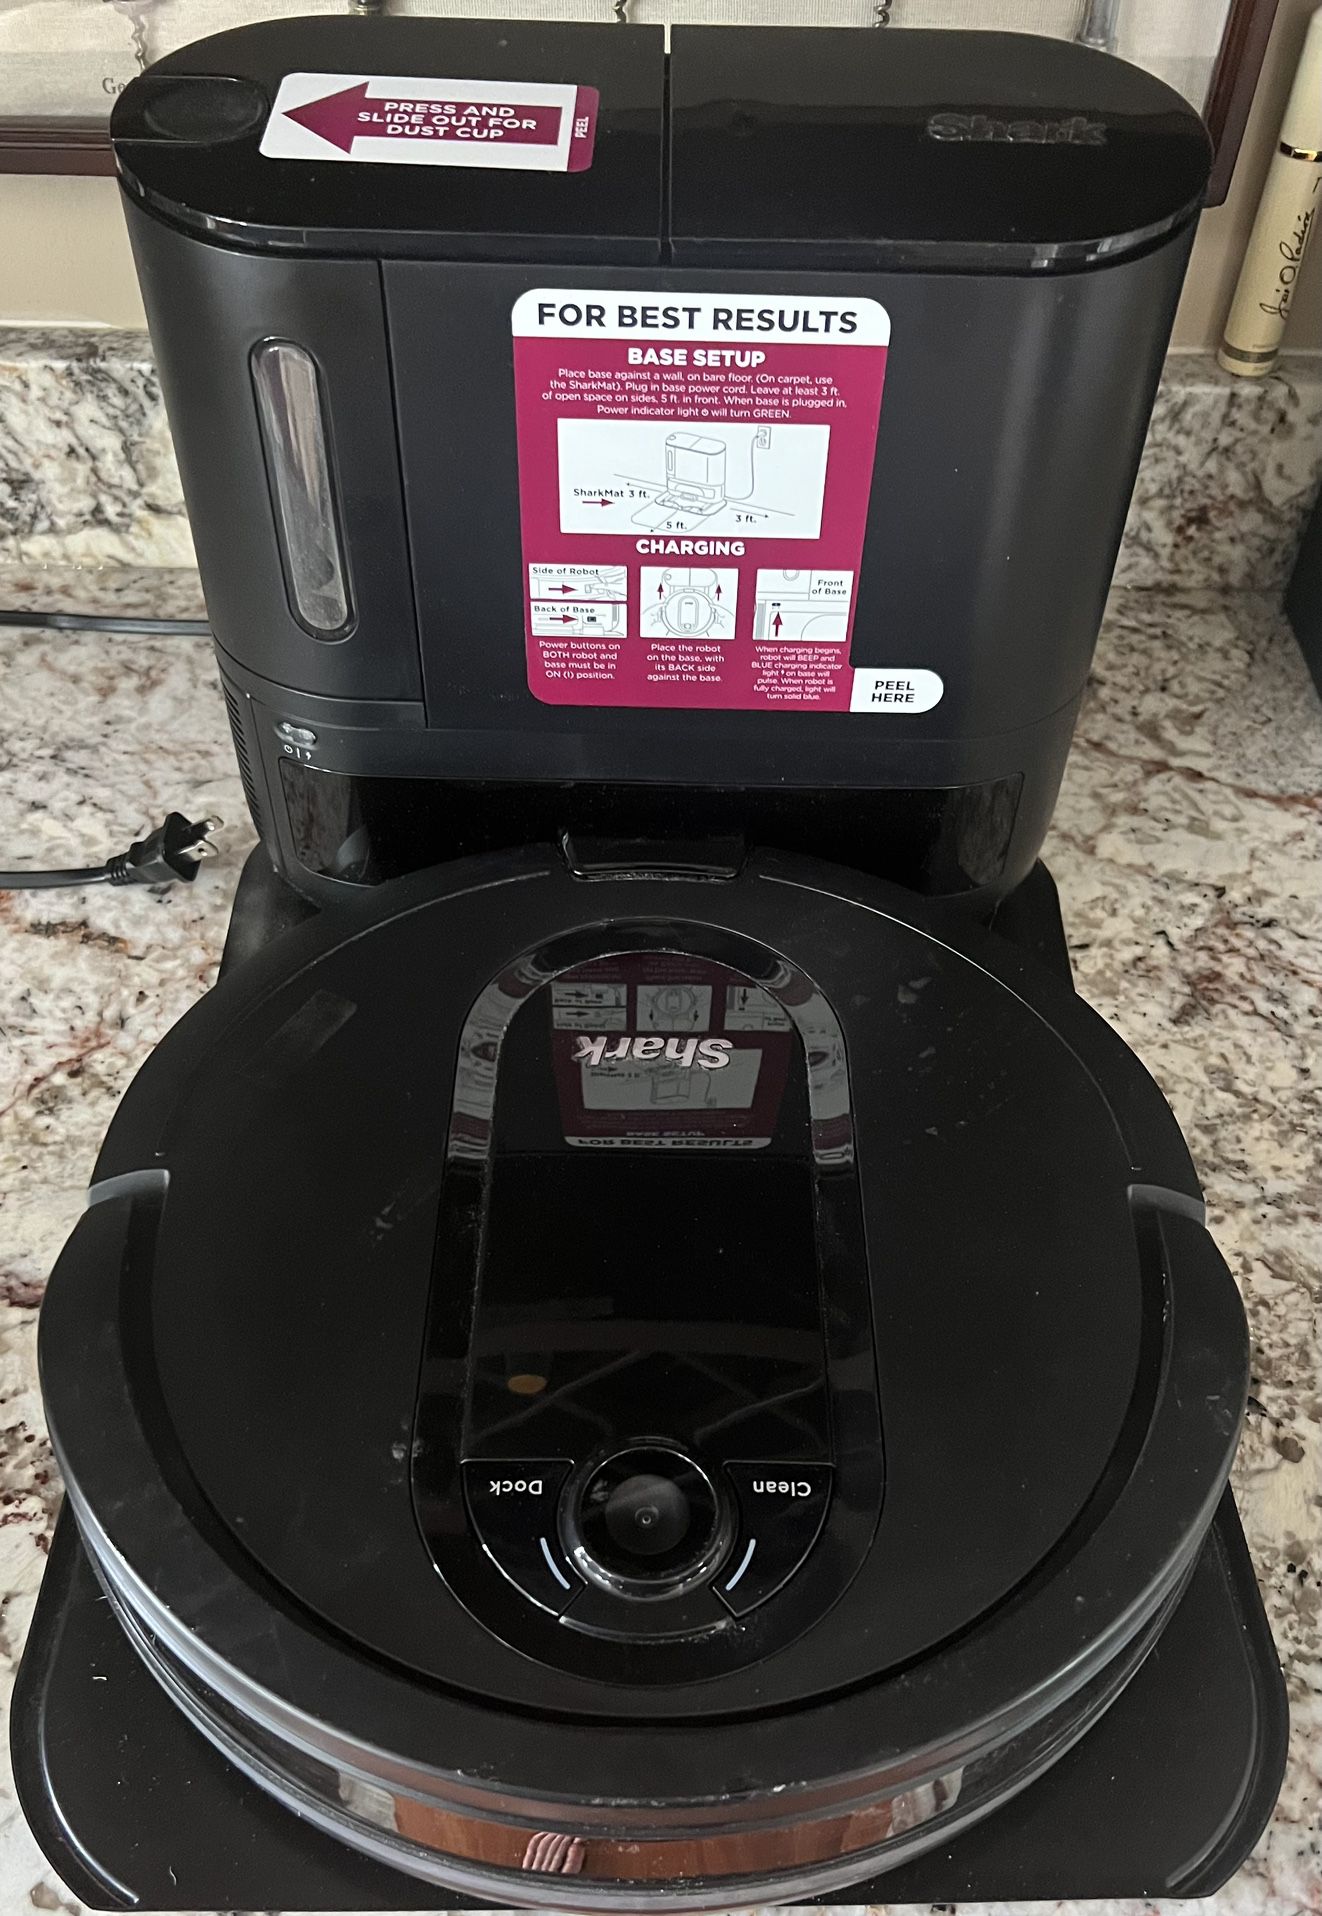 Shark® EZ Robot Vacuum with Self-Empty Base, Row-by-Row Cleaning, Powerful Suction, Perfect for Pet Hair, Wi-Fi, Carpets & Hard Floors, RV910S